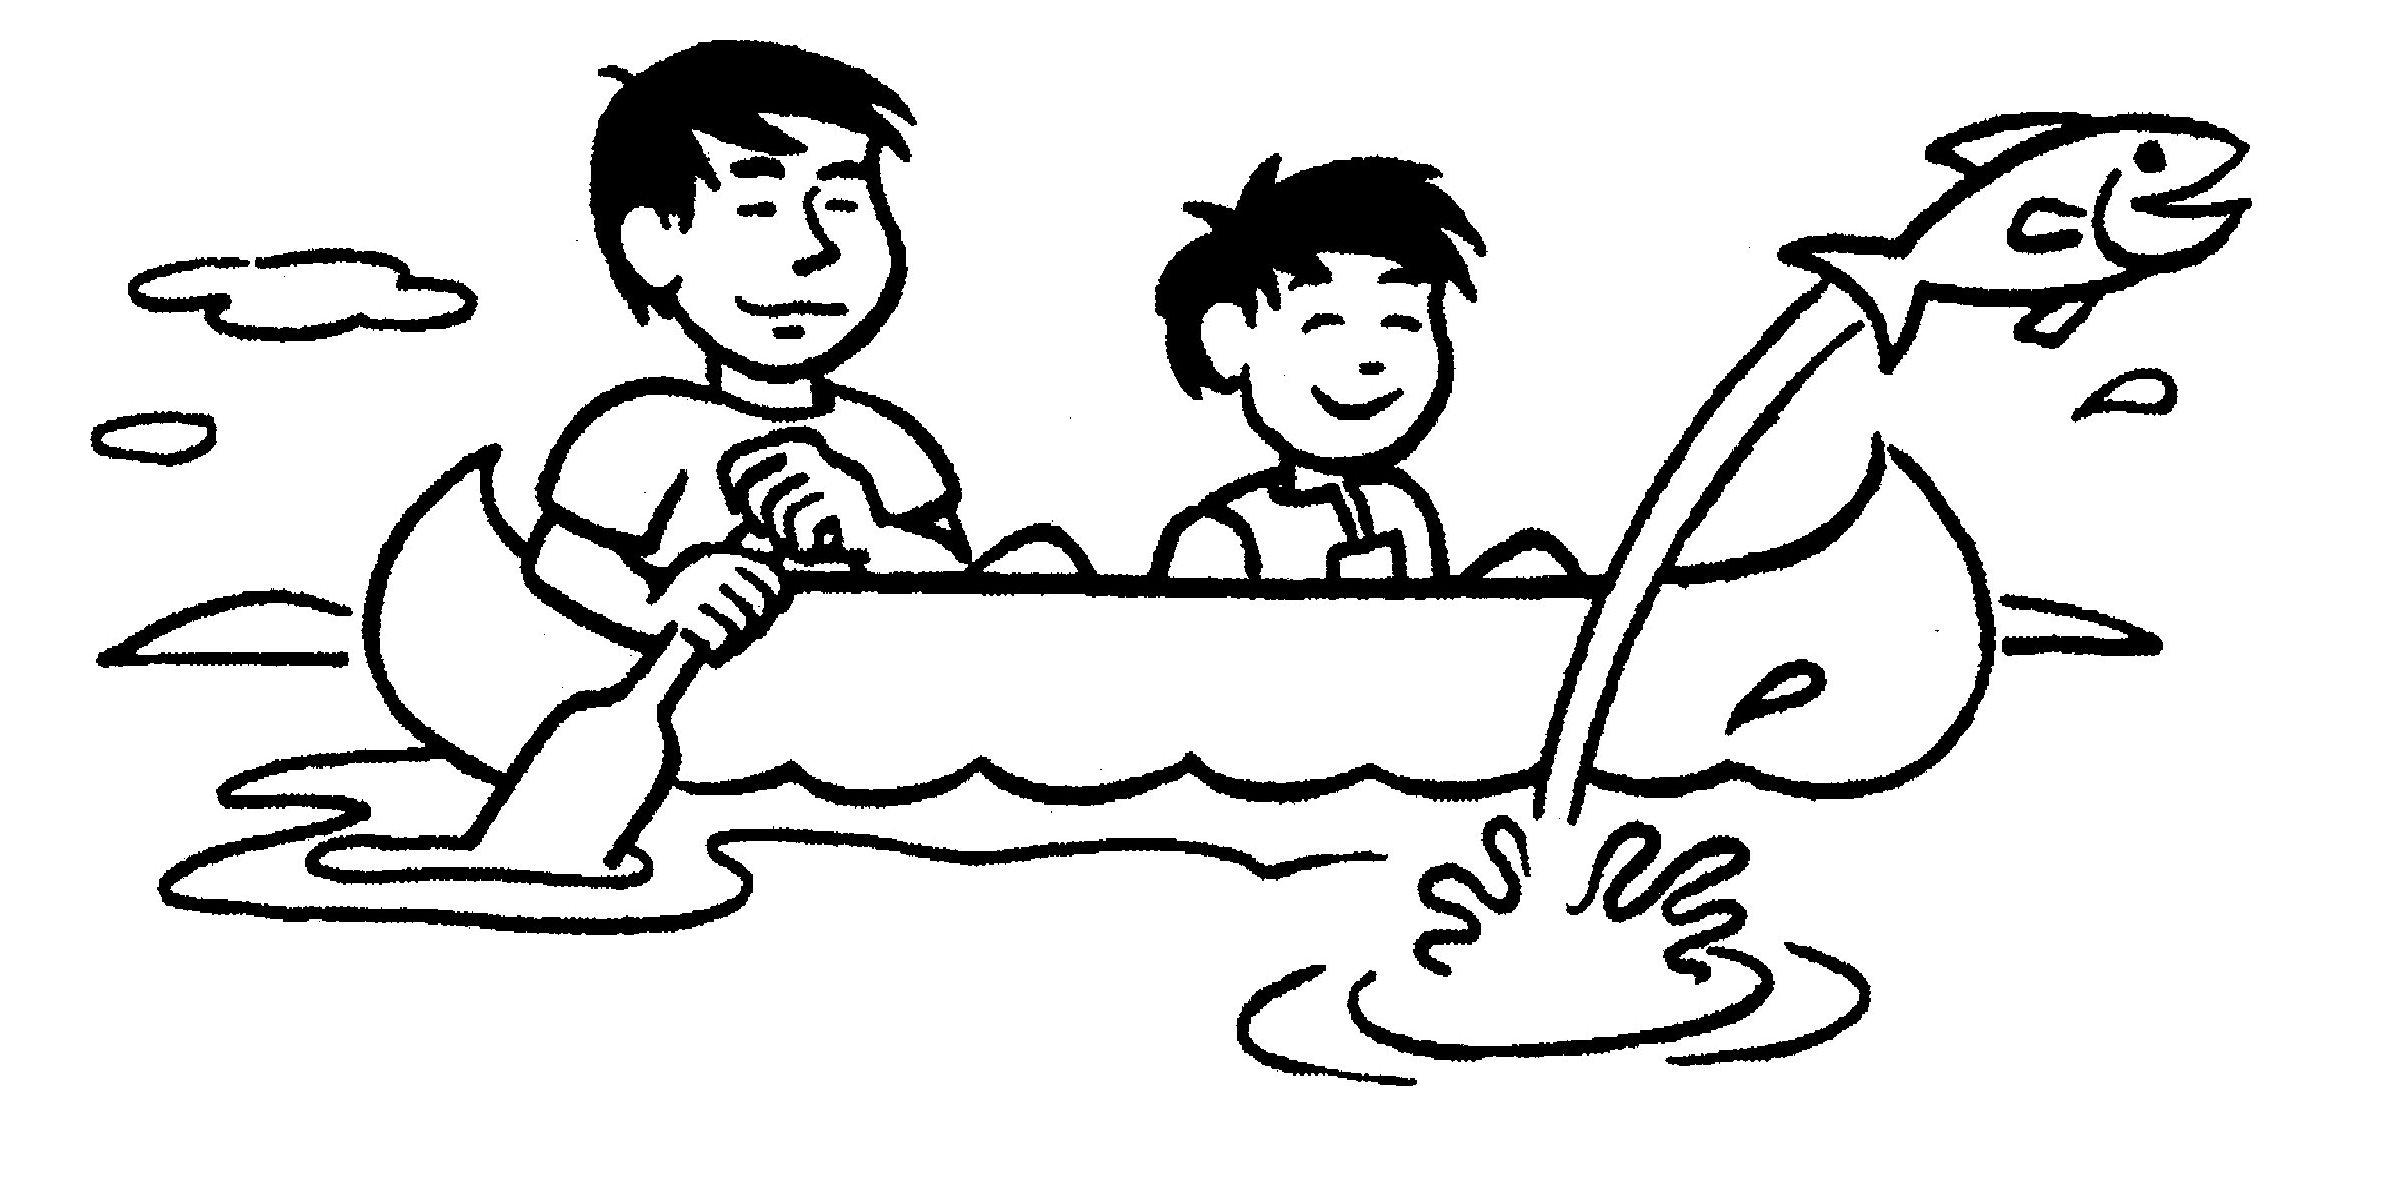 Kids Canoeing Clipart   Clipart Panda   Free Clipart Images